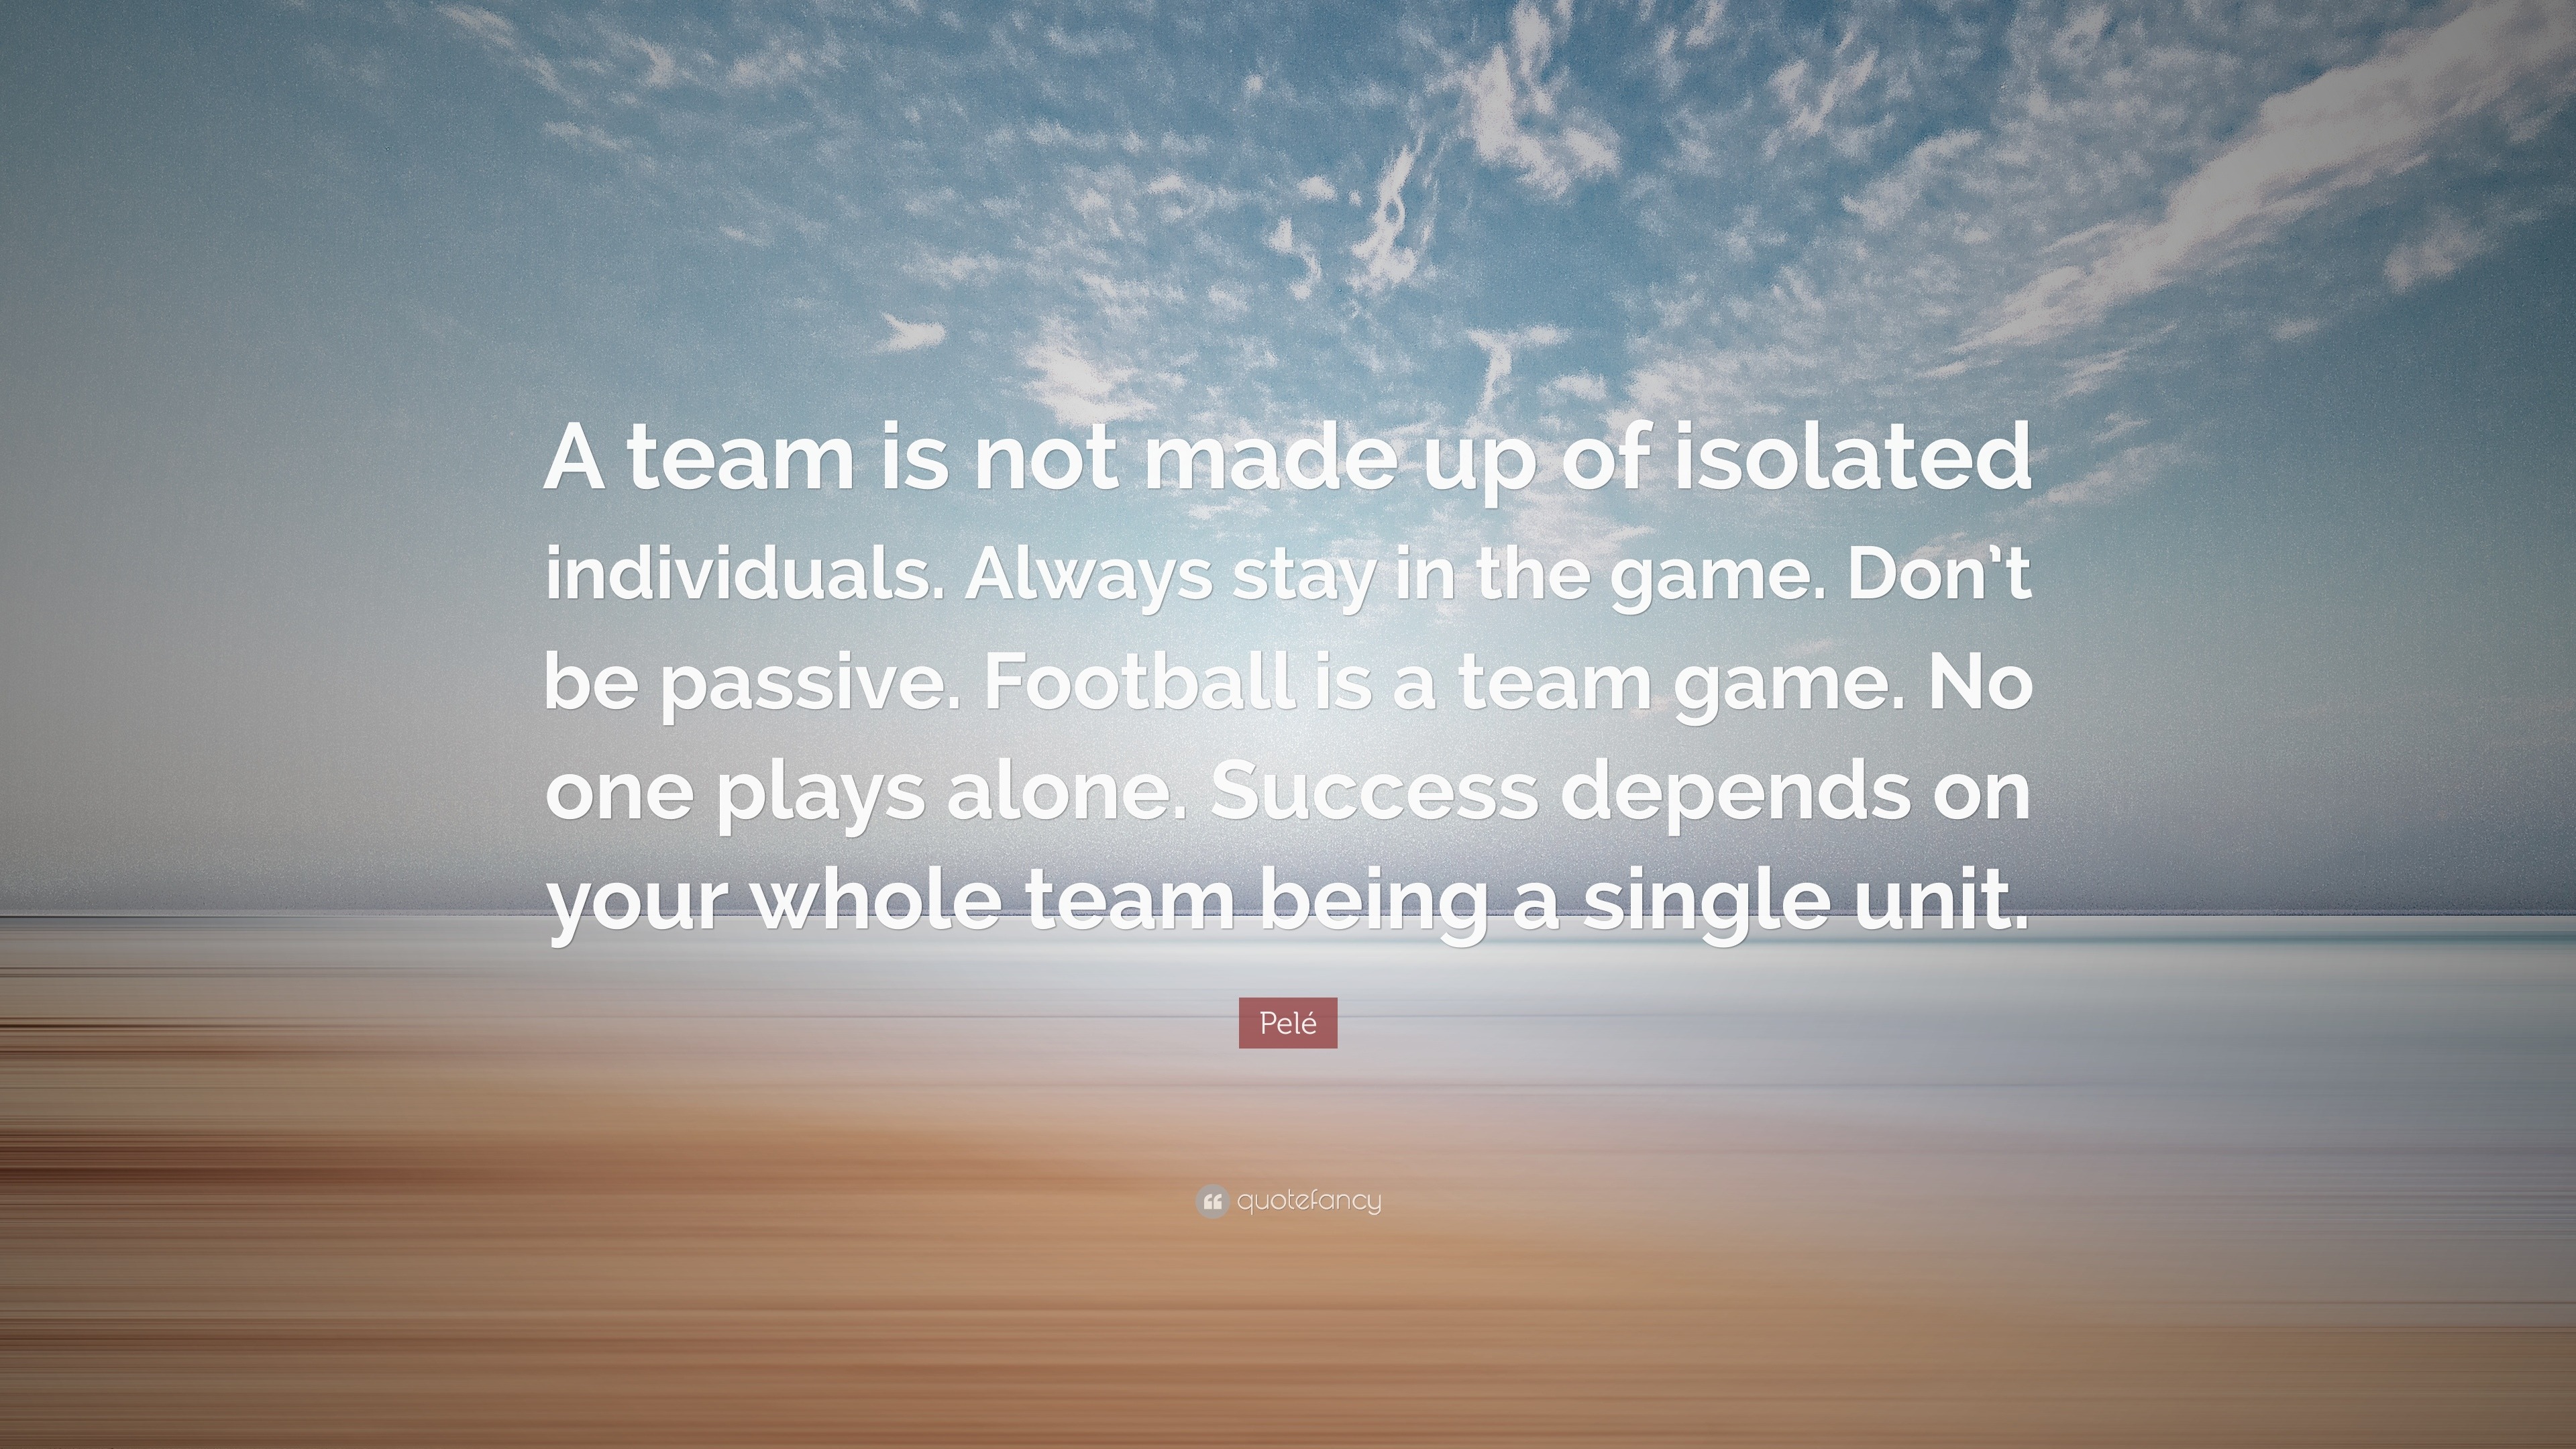 Pelé Quote: “A team is not made up of isolated individuals. Always stay